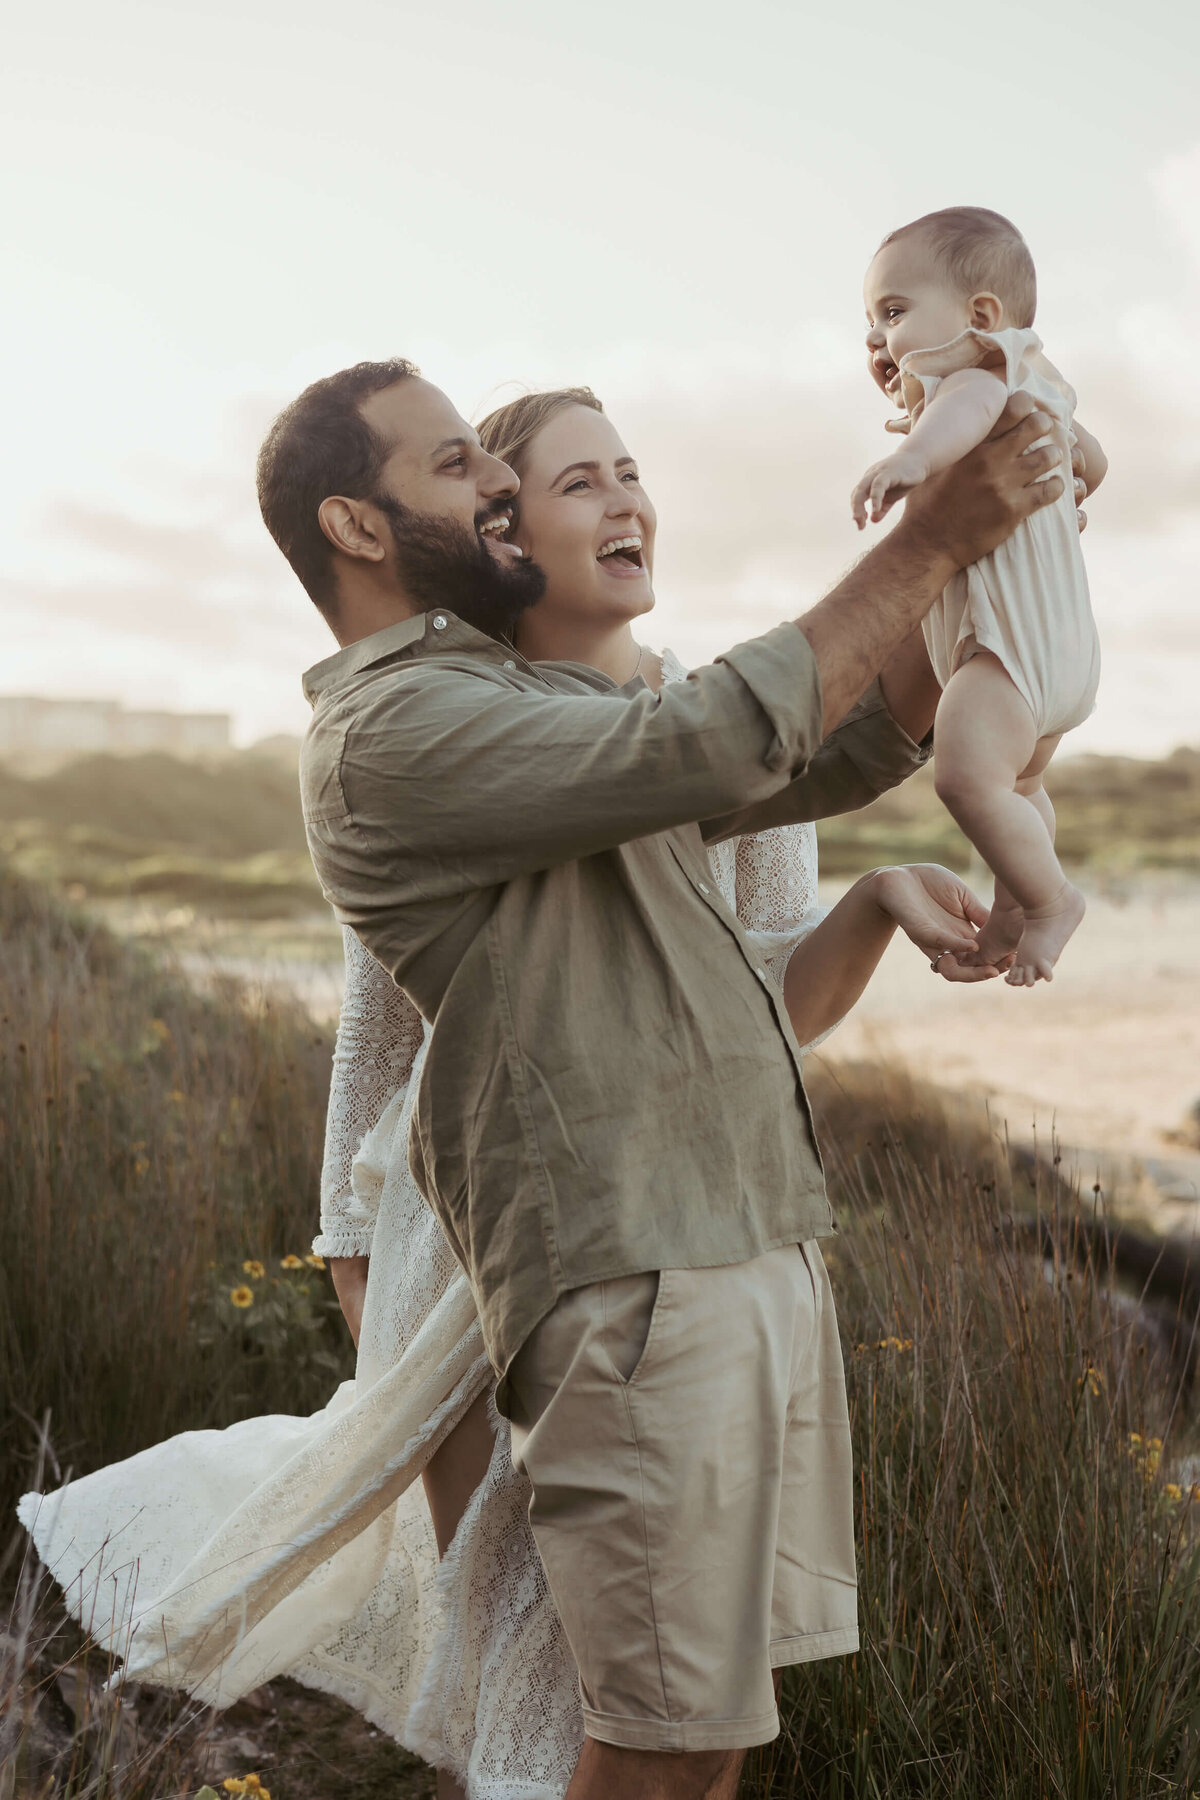 Dad in a green linen shirt and tan chino shorts is next to his wife are smiling widely while he holds up their giggling baby.